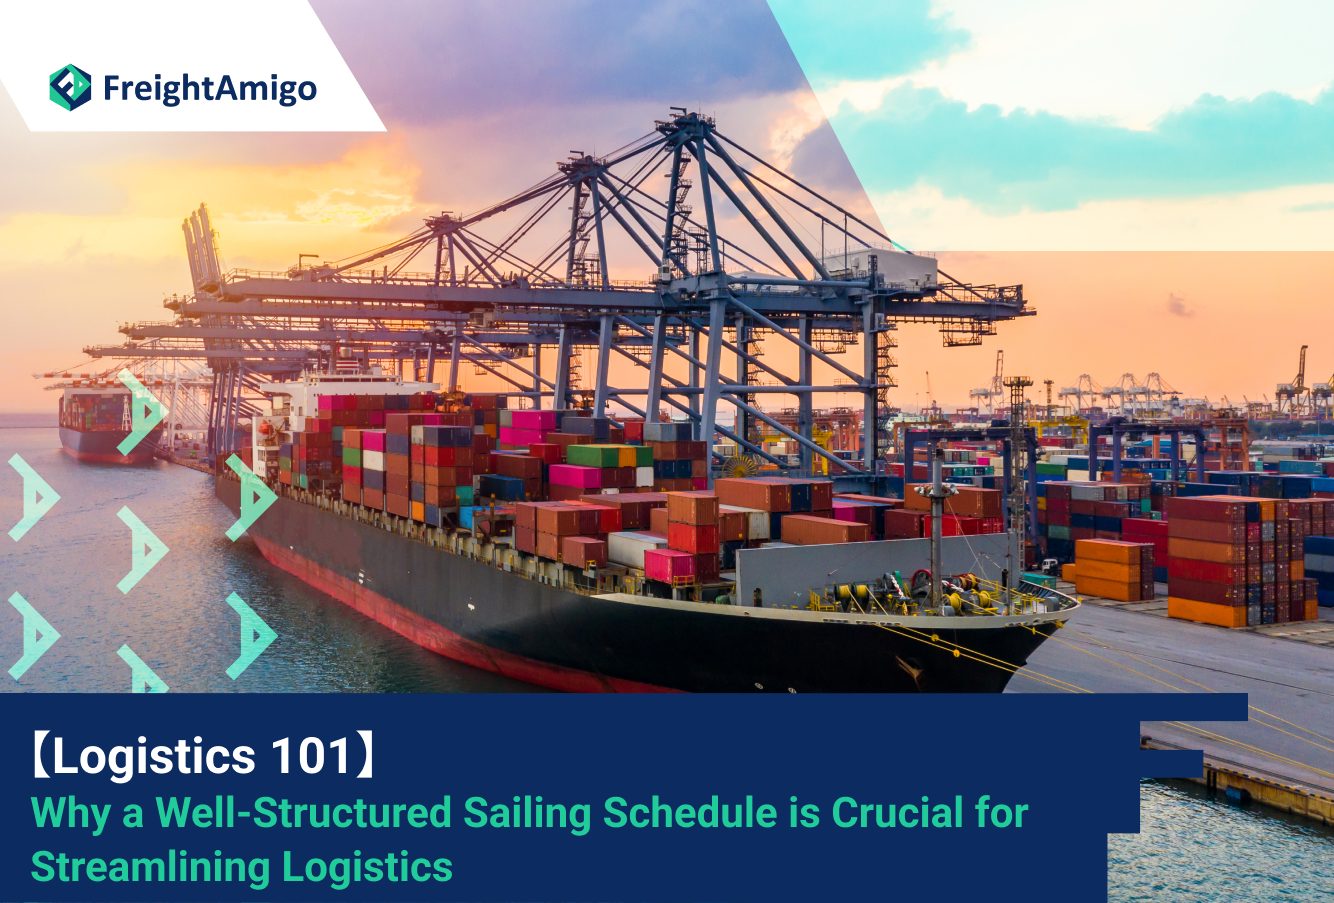 【Logistics 101】Why a Well-Structured Sailing Schedule is Crucial for Streamlining Logistics